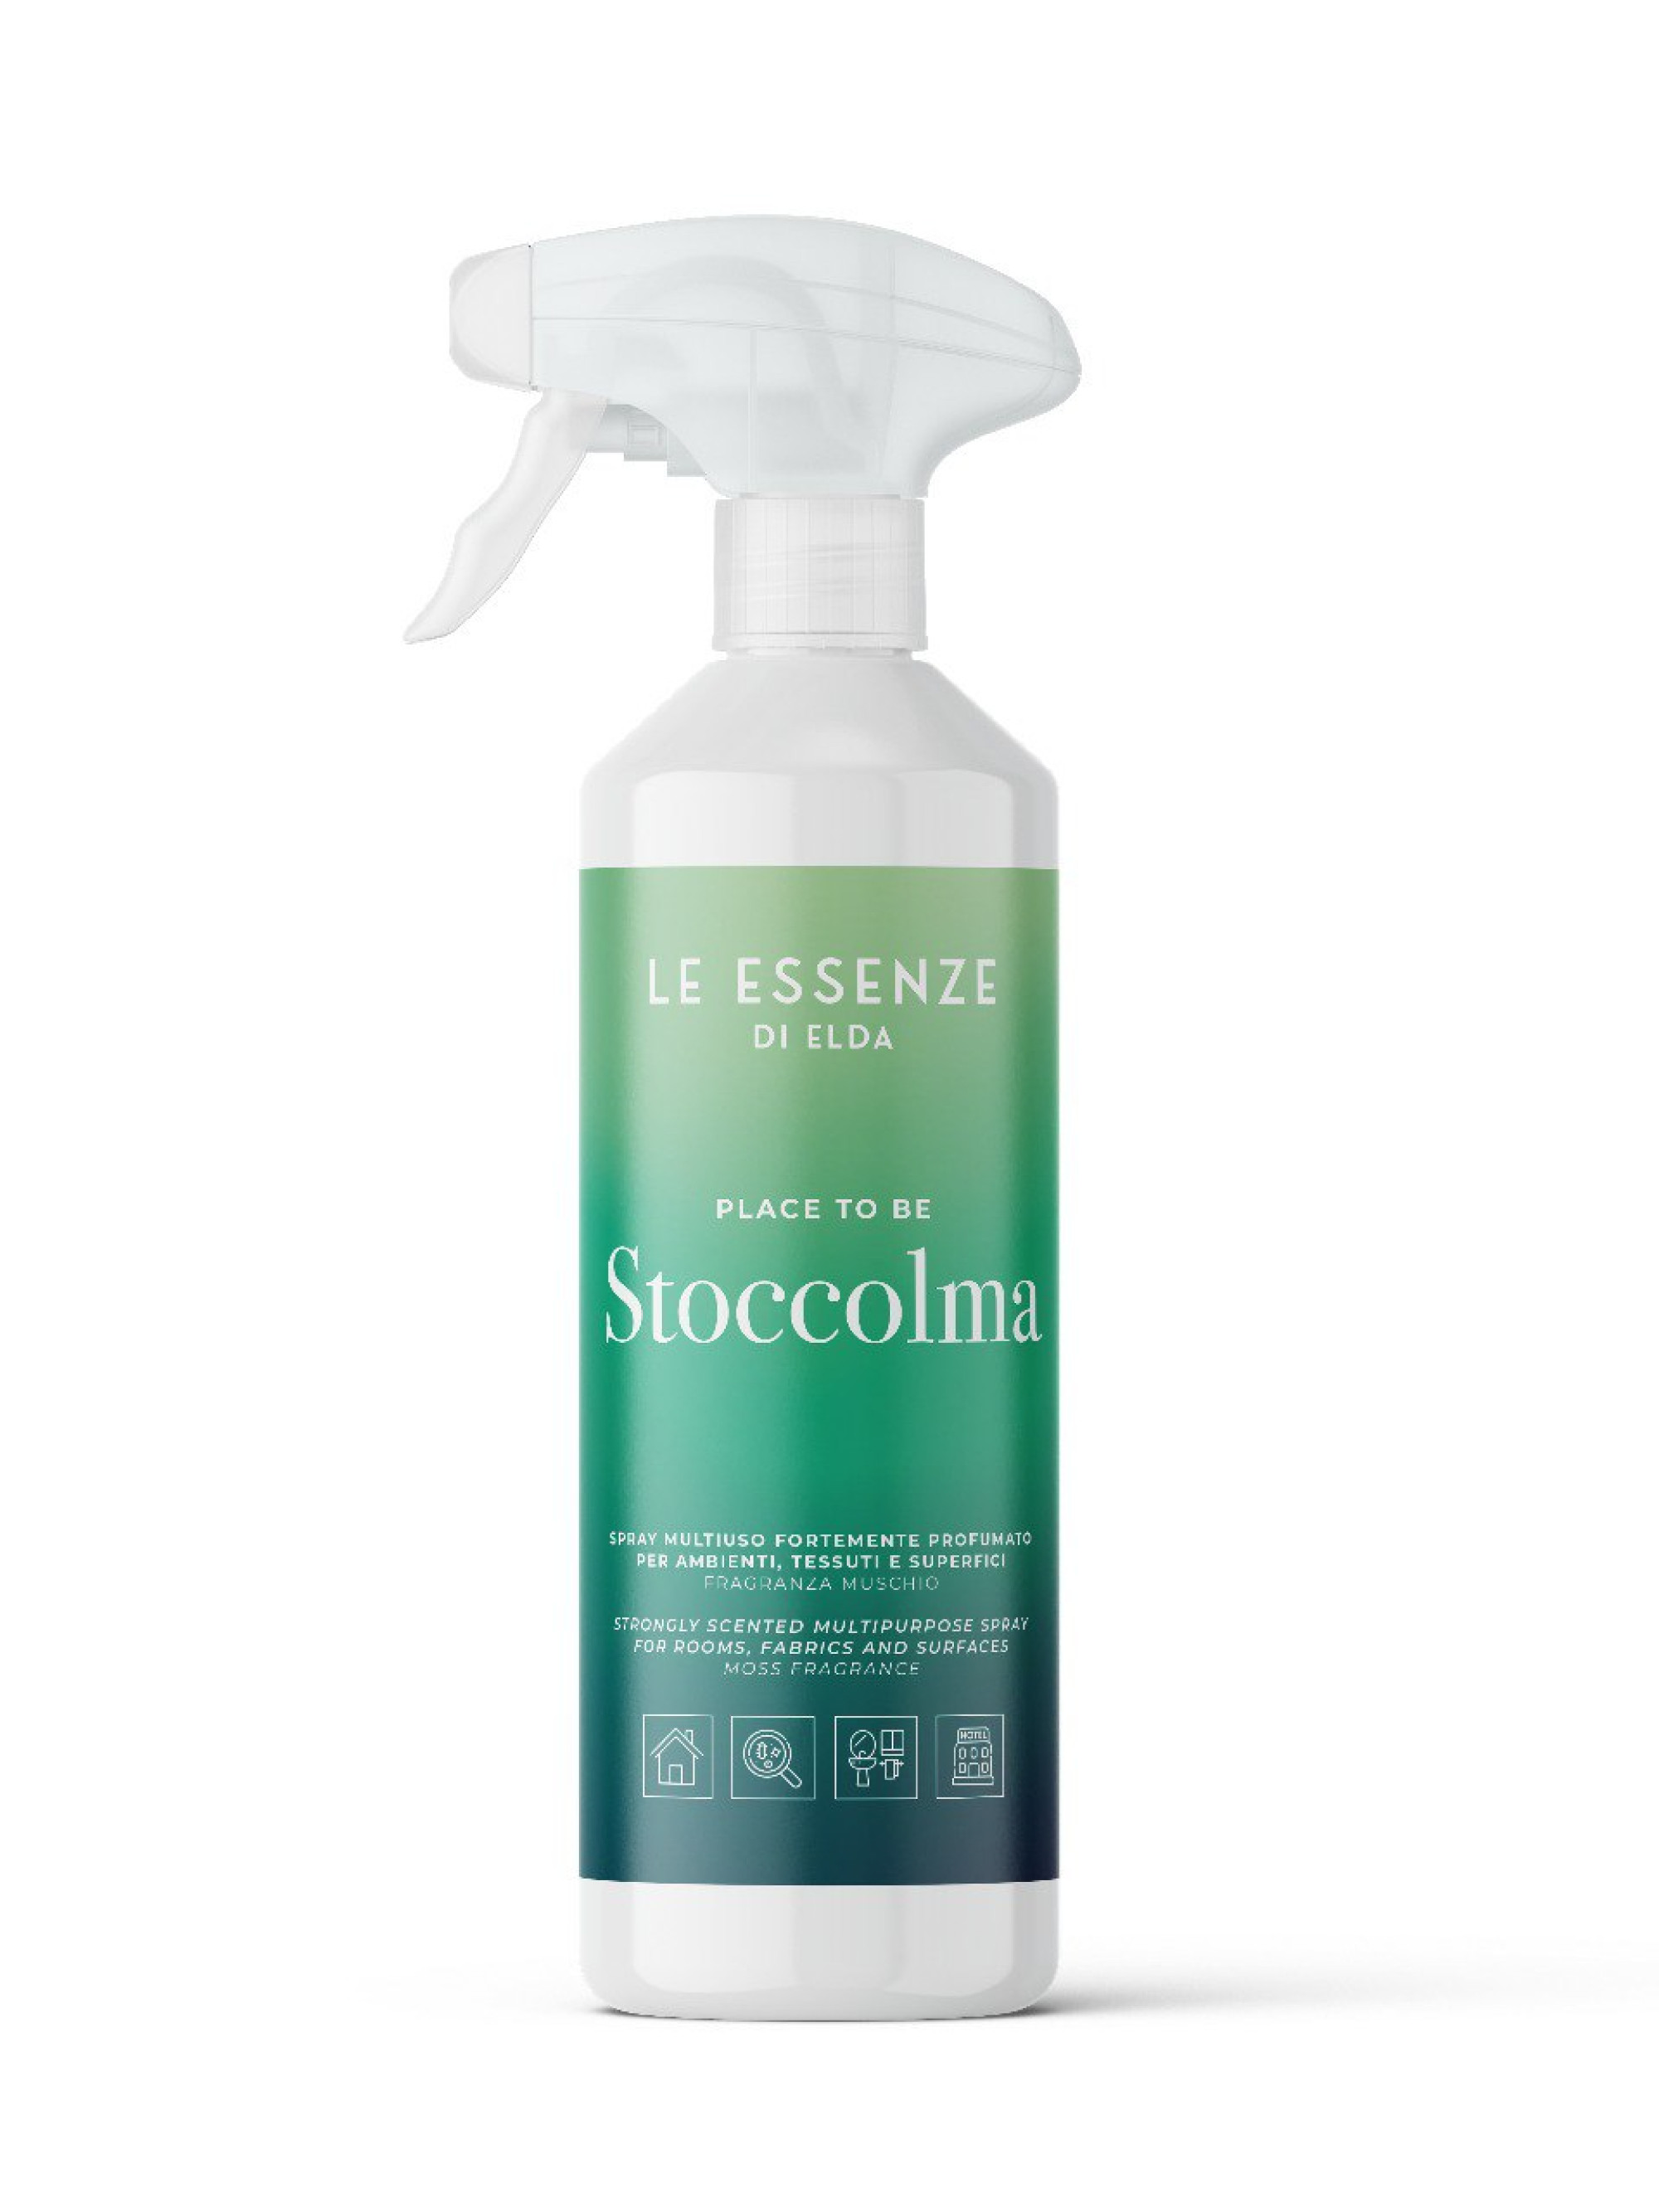 Place to Be Stoccolma - Multipurpose Spray - Place to Be Line